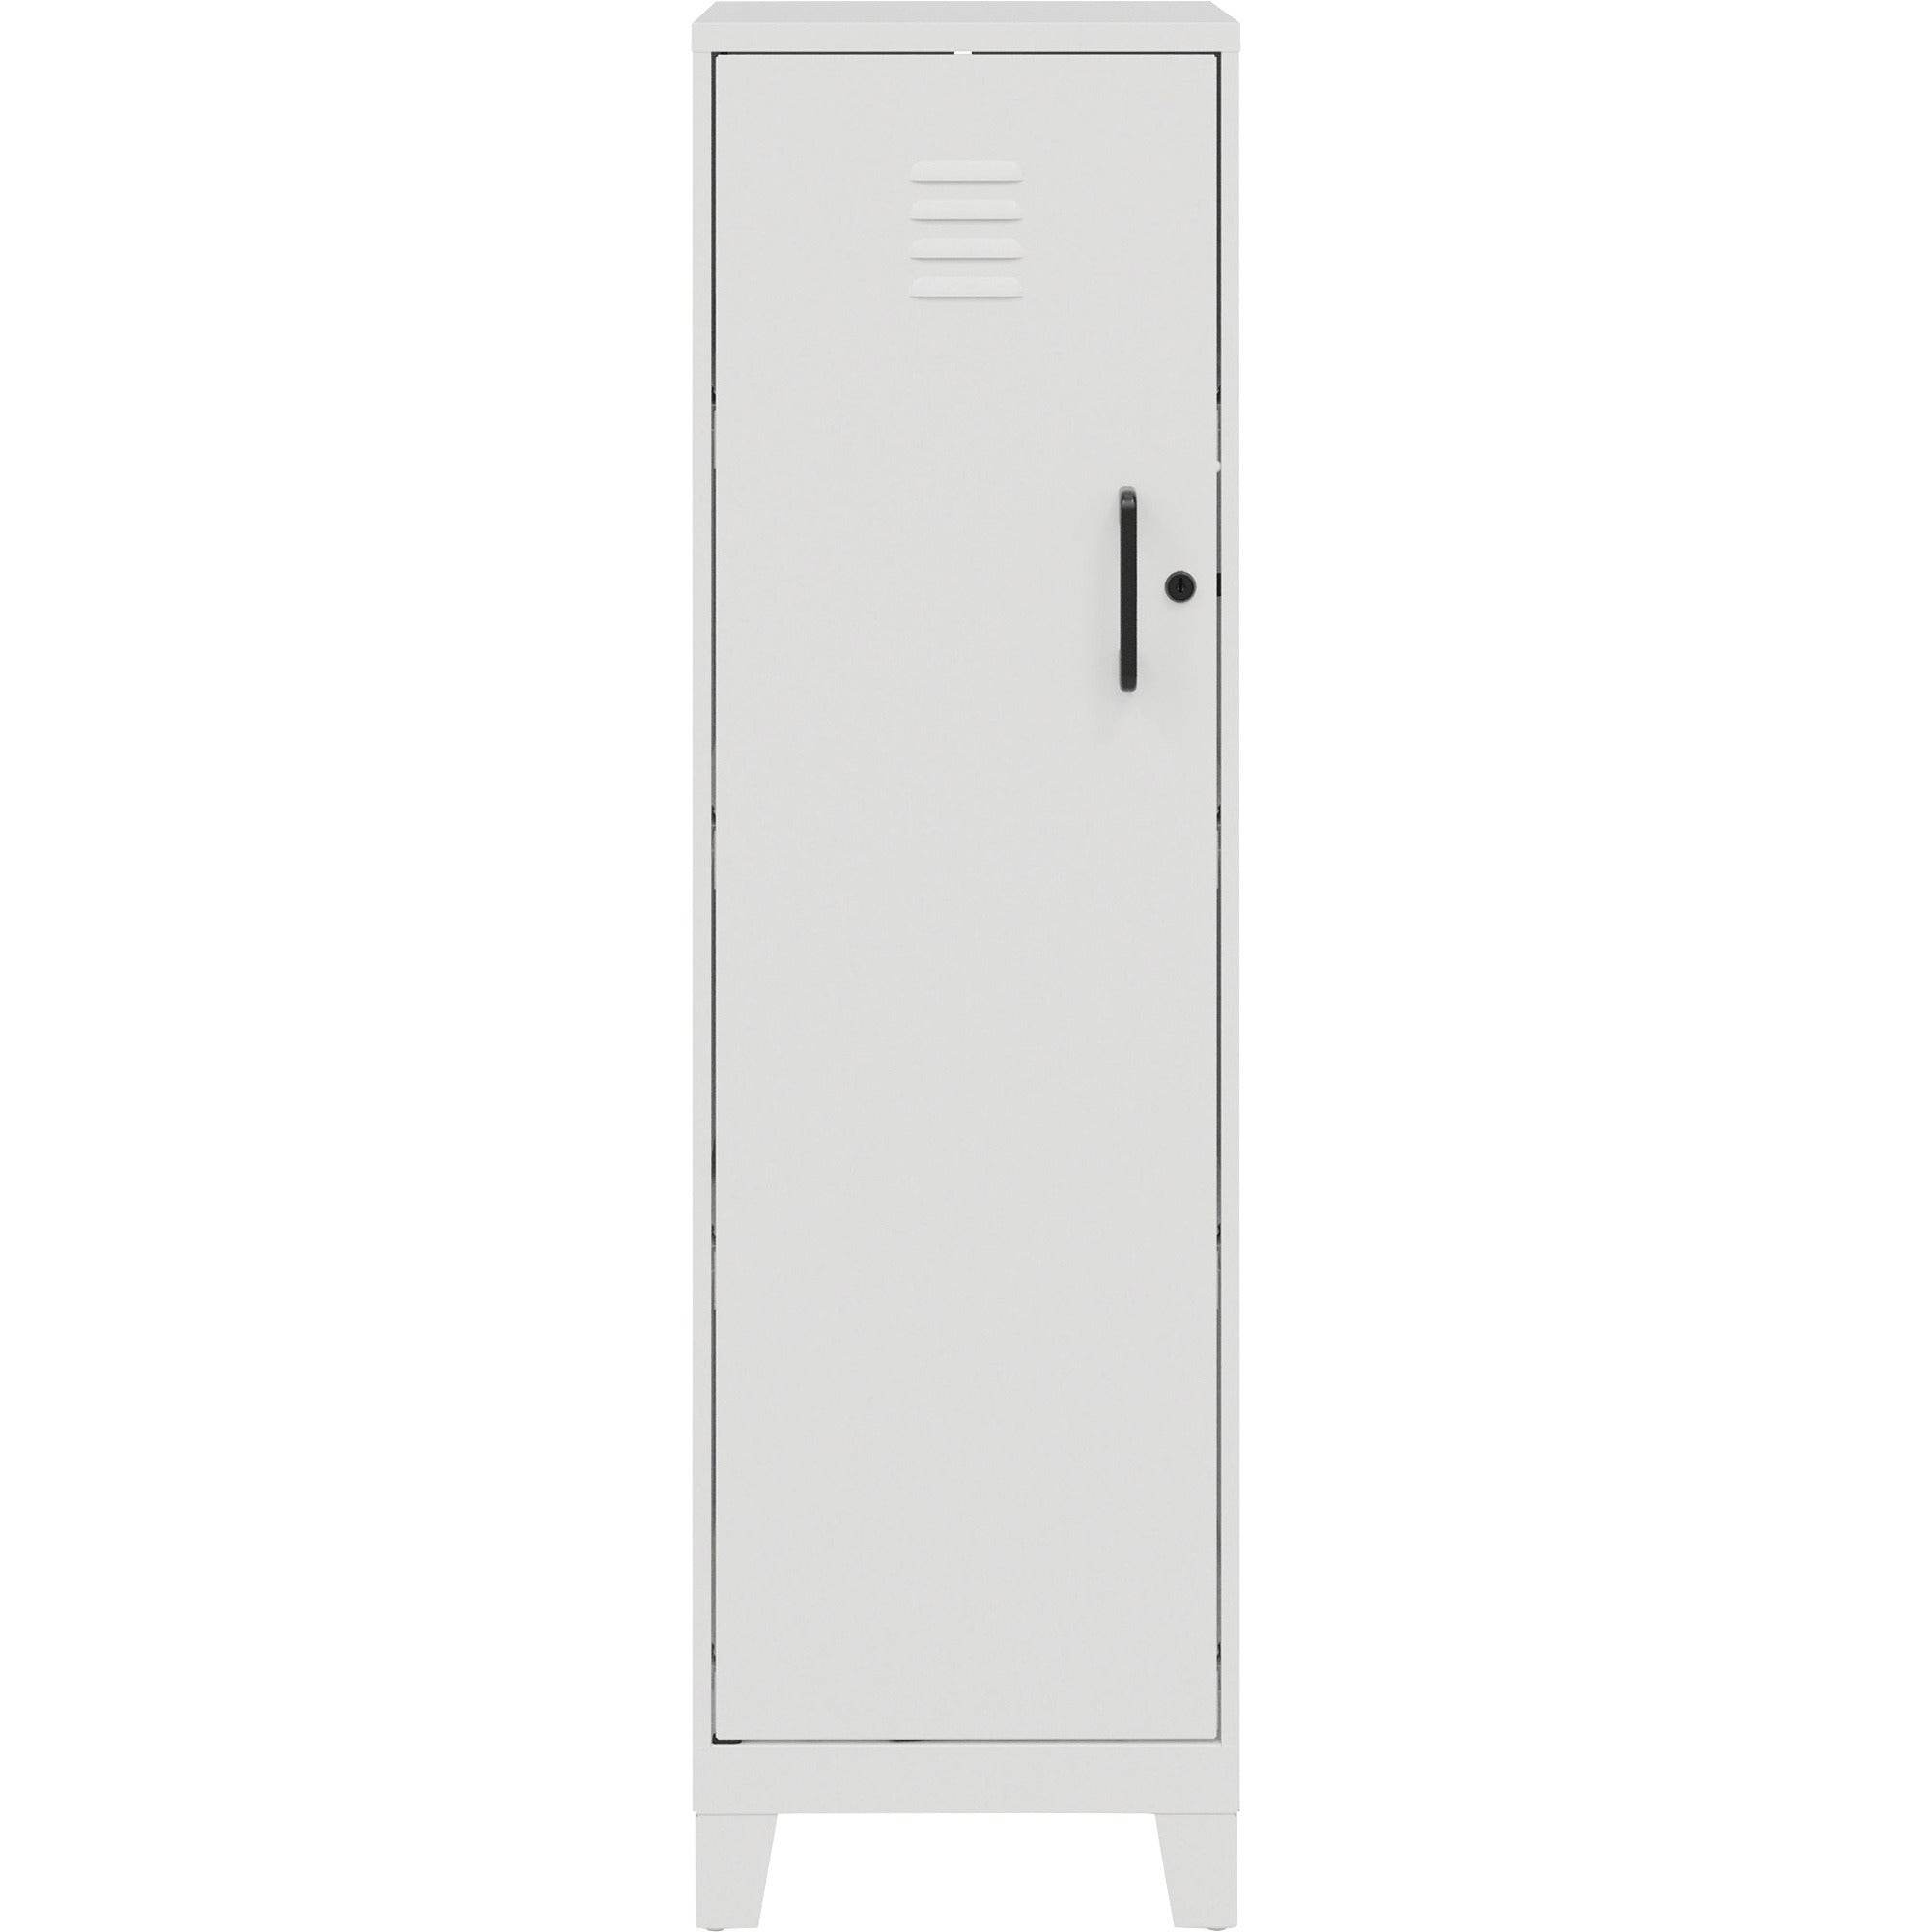 nusparc-personal-locker-4-shelves-for-office-home-sport-equipments-toy-game-classroom-playroom-basement-garage-overall-size-533-x-142-x-18-white-steel-taa-compliant_nprsl418zzwe - 2